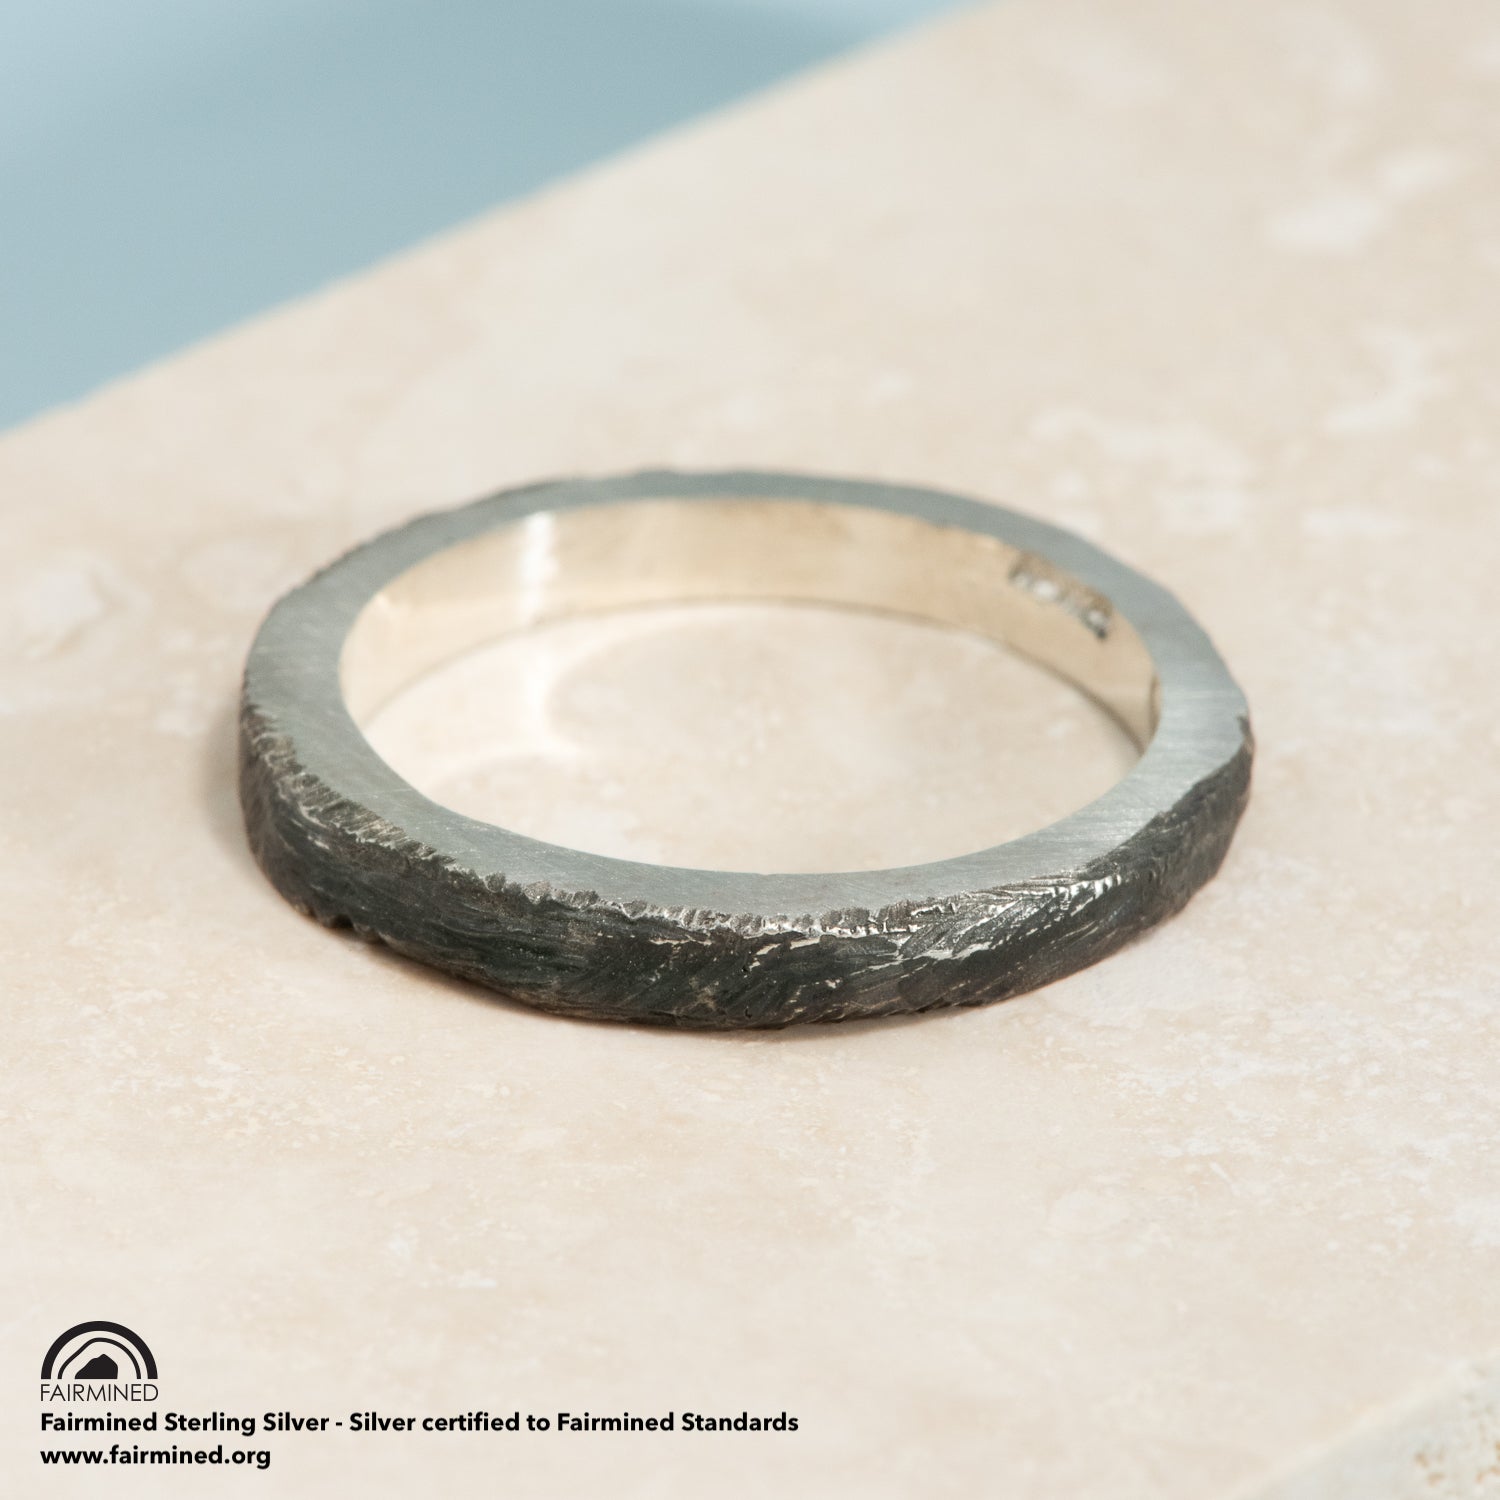 A silver ring with an oxidized brushed finish, and lightly polished high points.